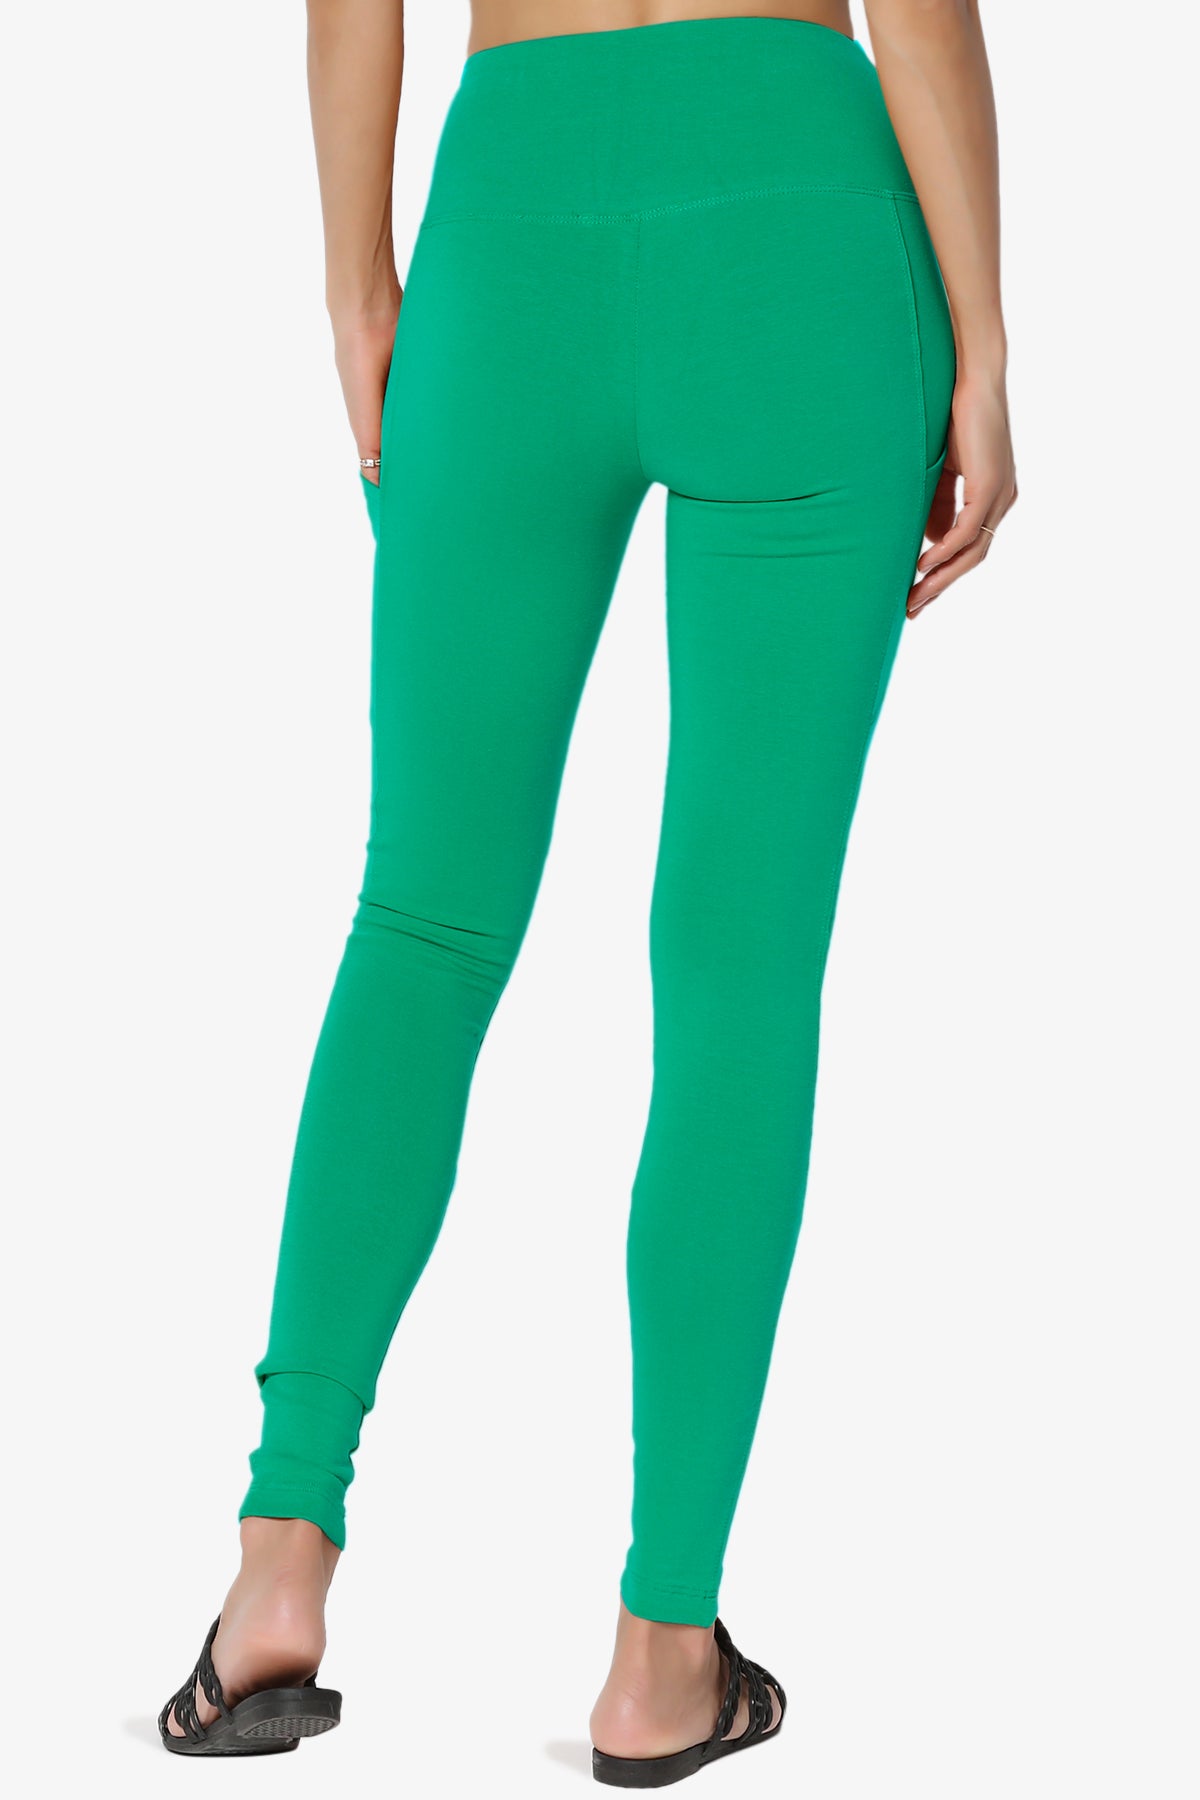 Ansley Luxe Cotton Leggings with Pockets KELLY GREEN_2